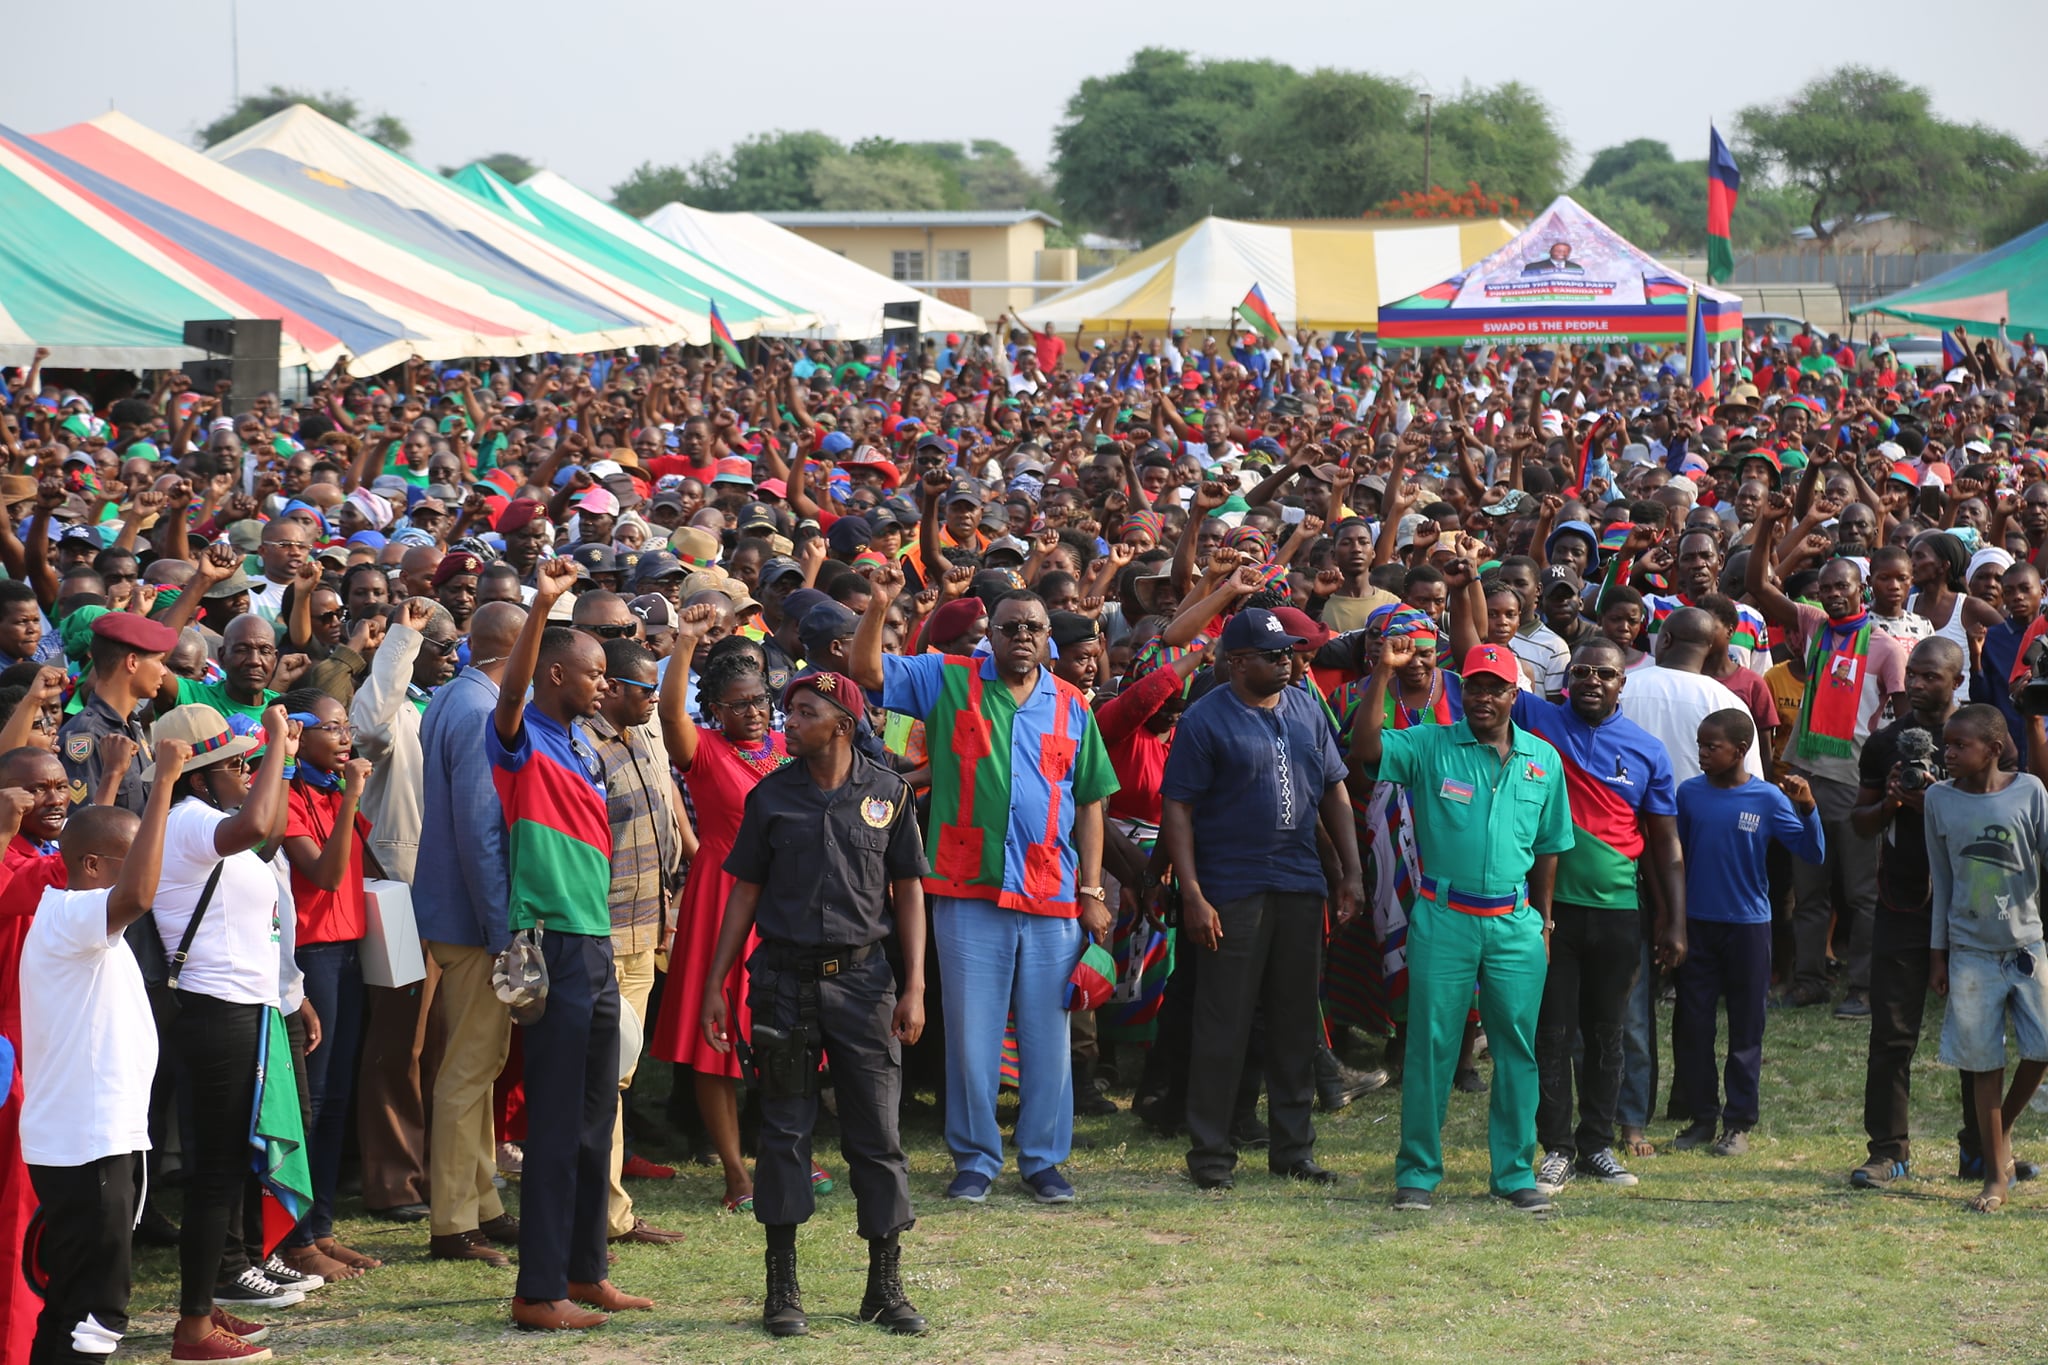 Swapo nomination race climaxes